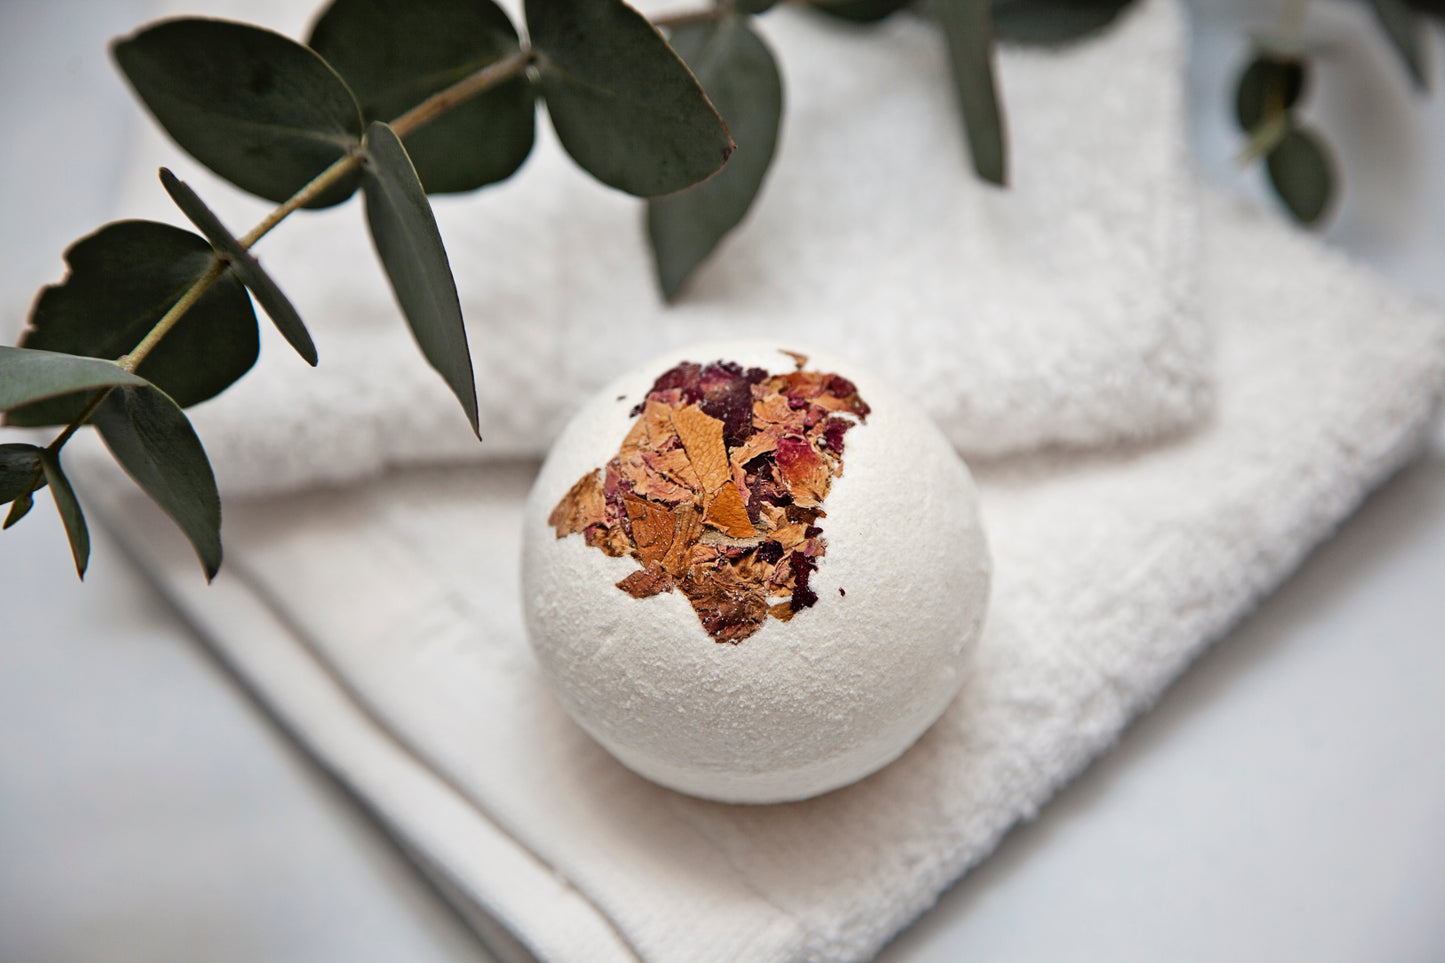 Lavender Bath Bomb Topped With Rose Petals